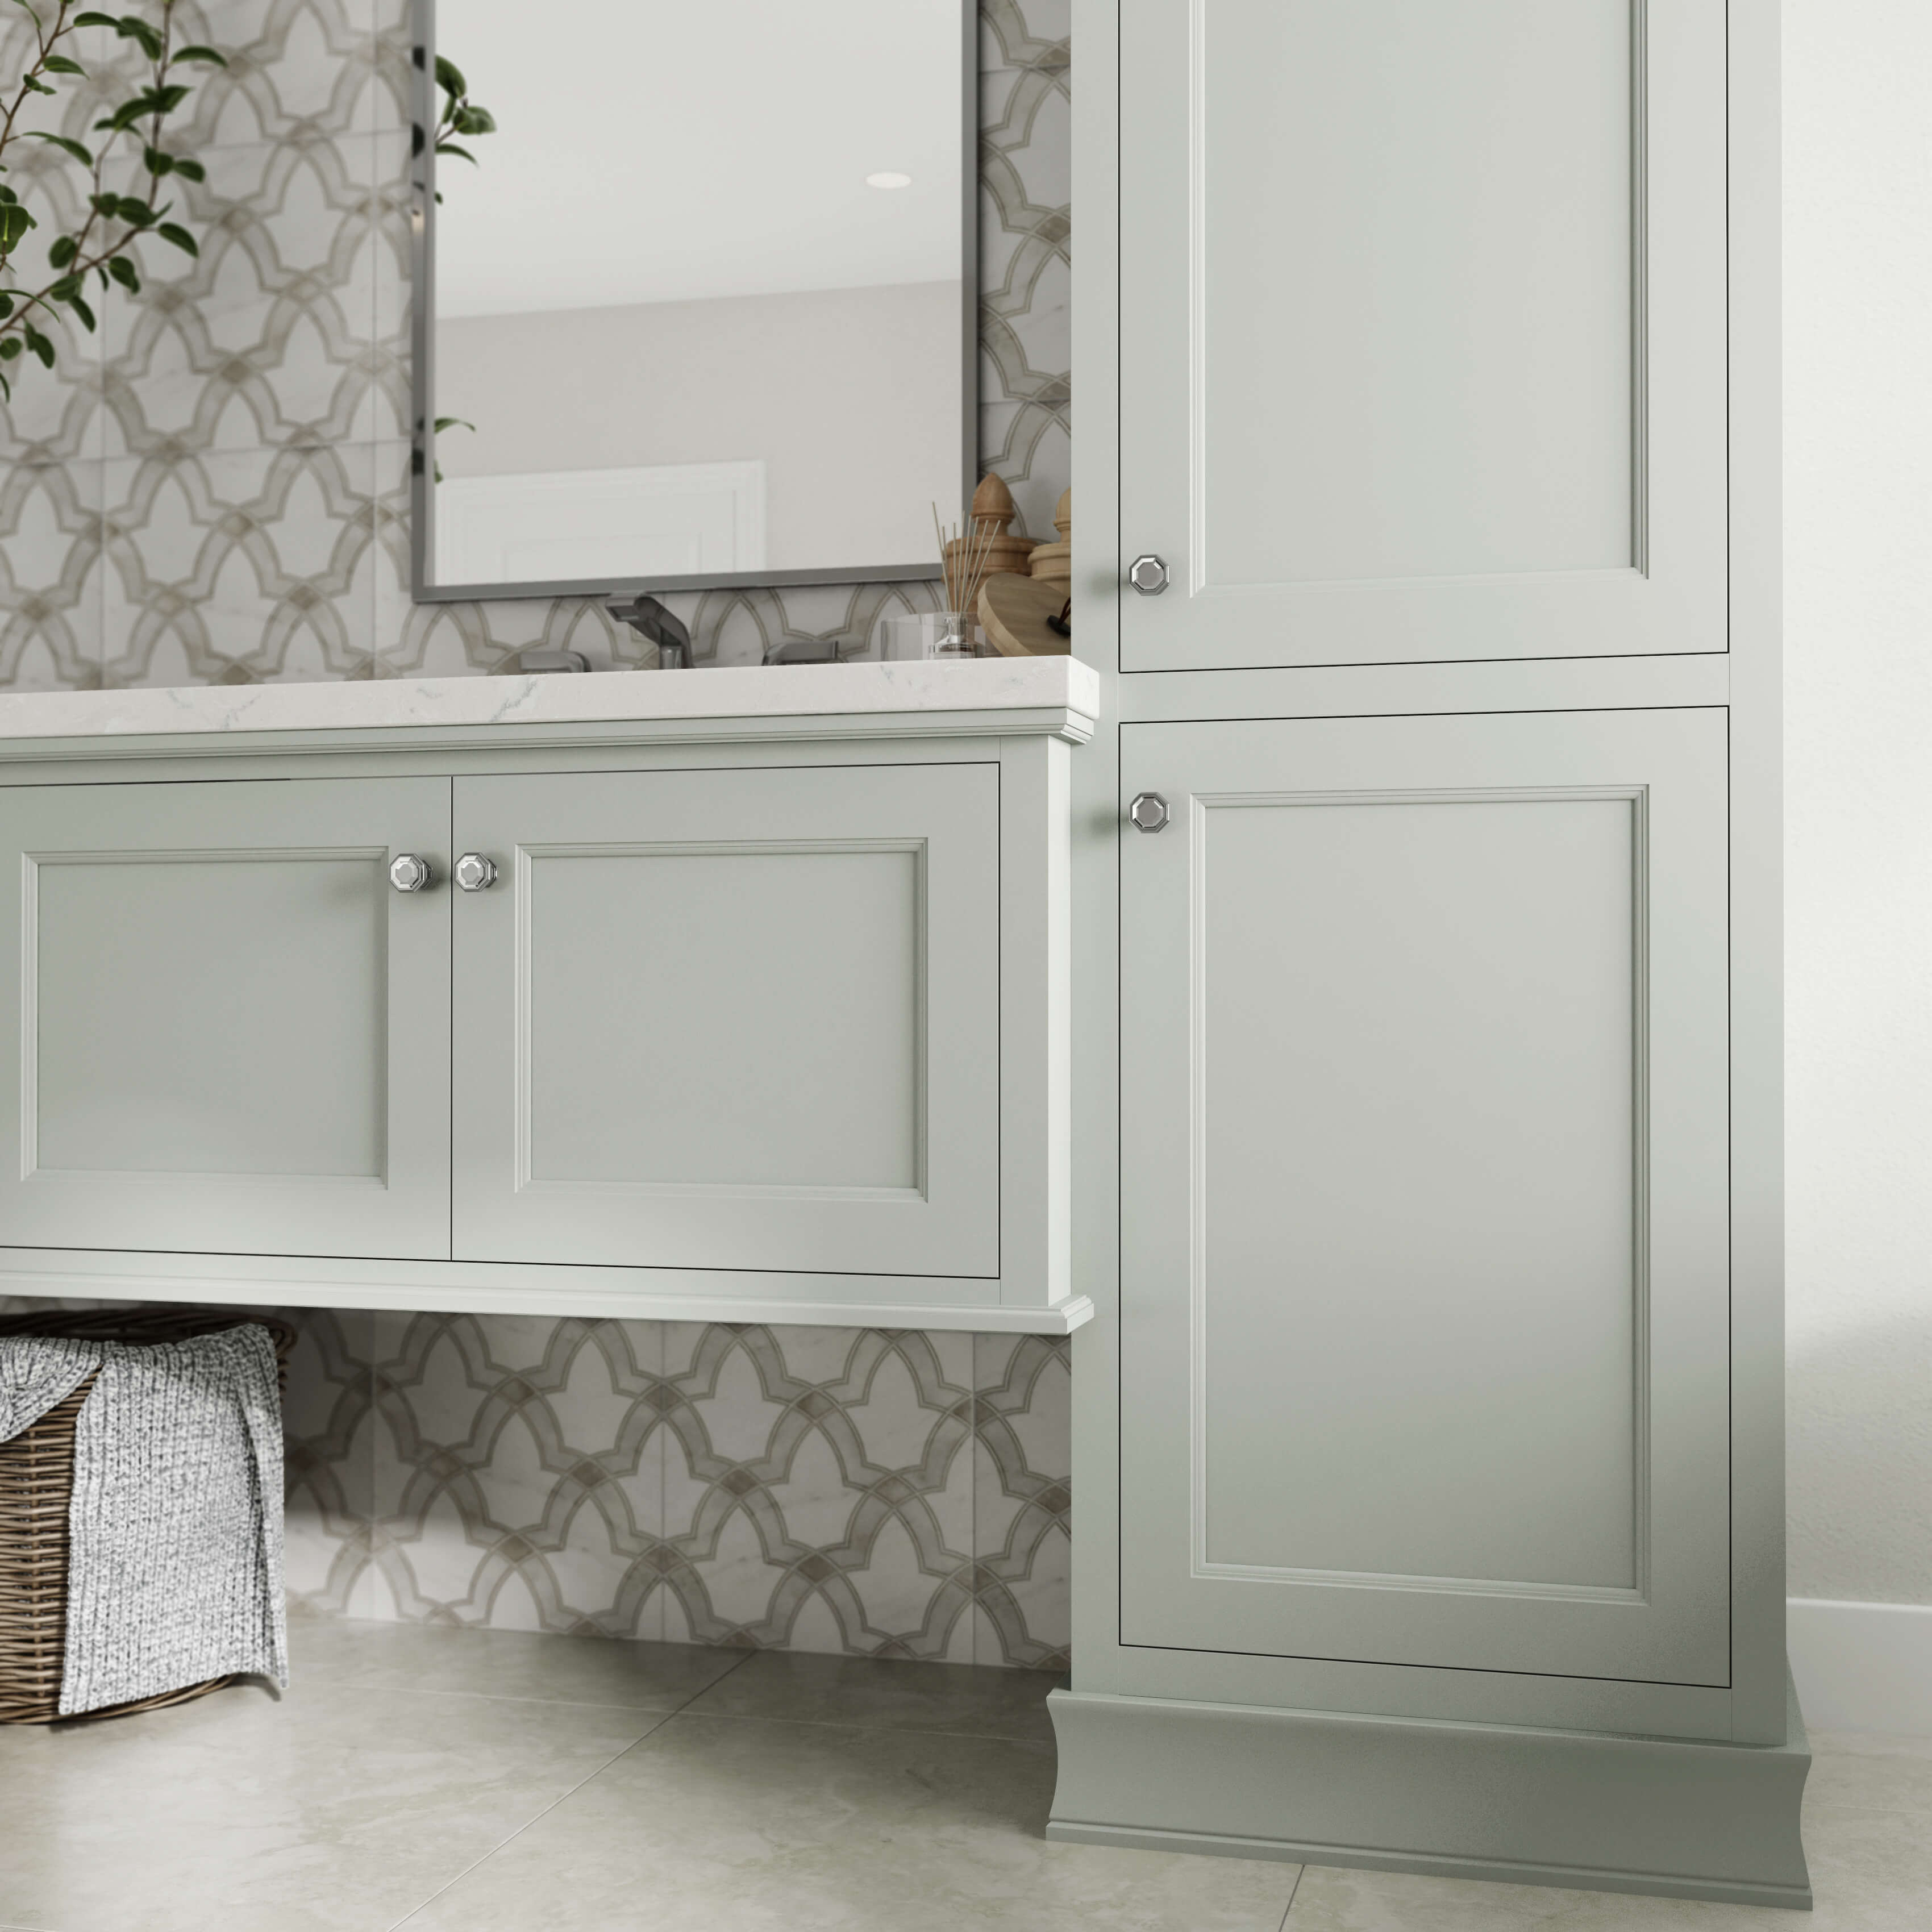 A close-up of the floating vanity cabinets paired with the floor sitting cabinets shown with inset cabinet doors.